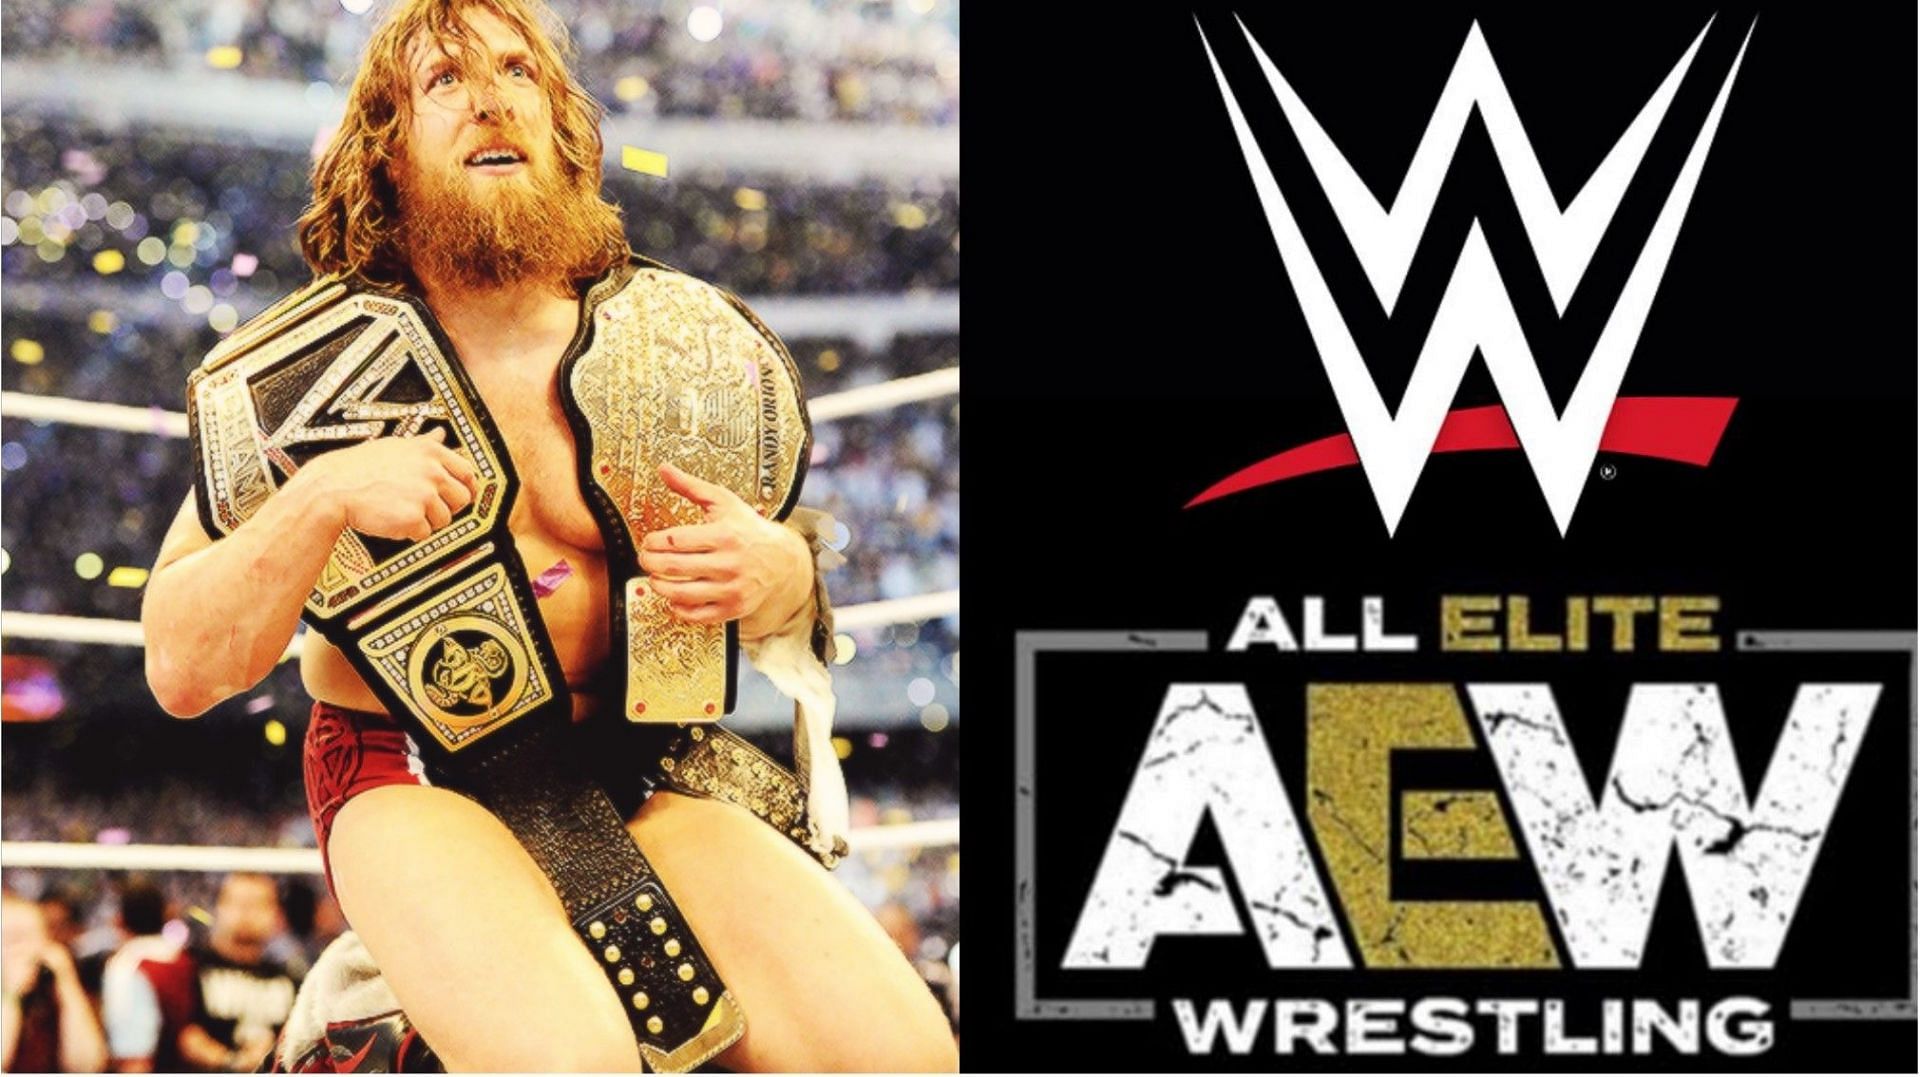 Bryan Danielson pulled off a miracle at WrestleMania 30